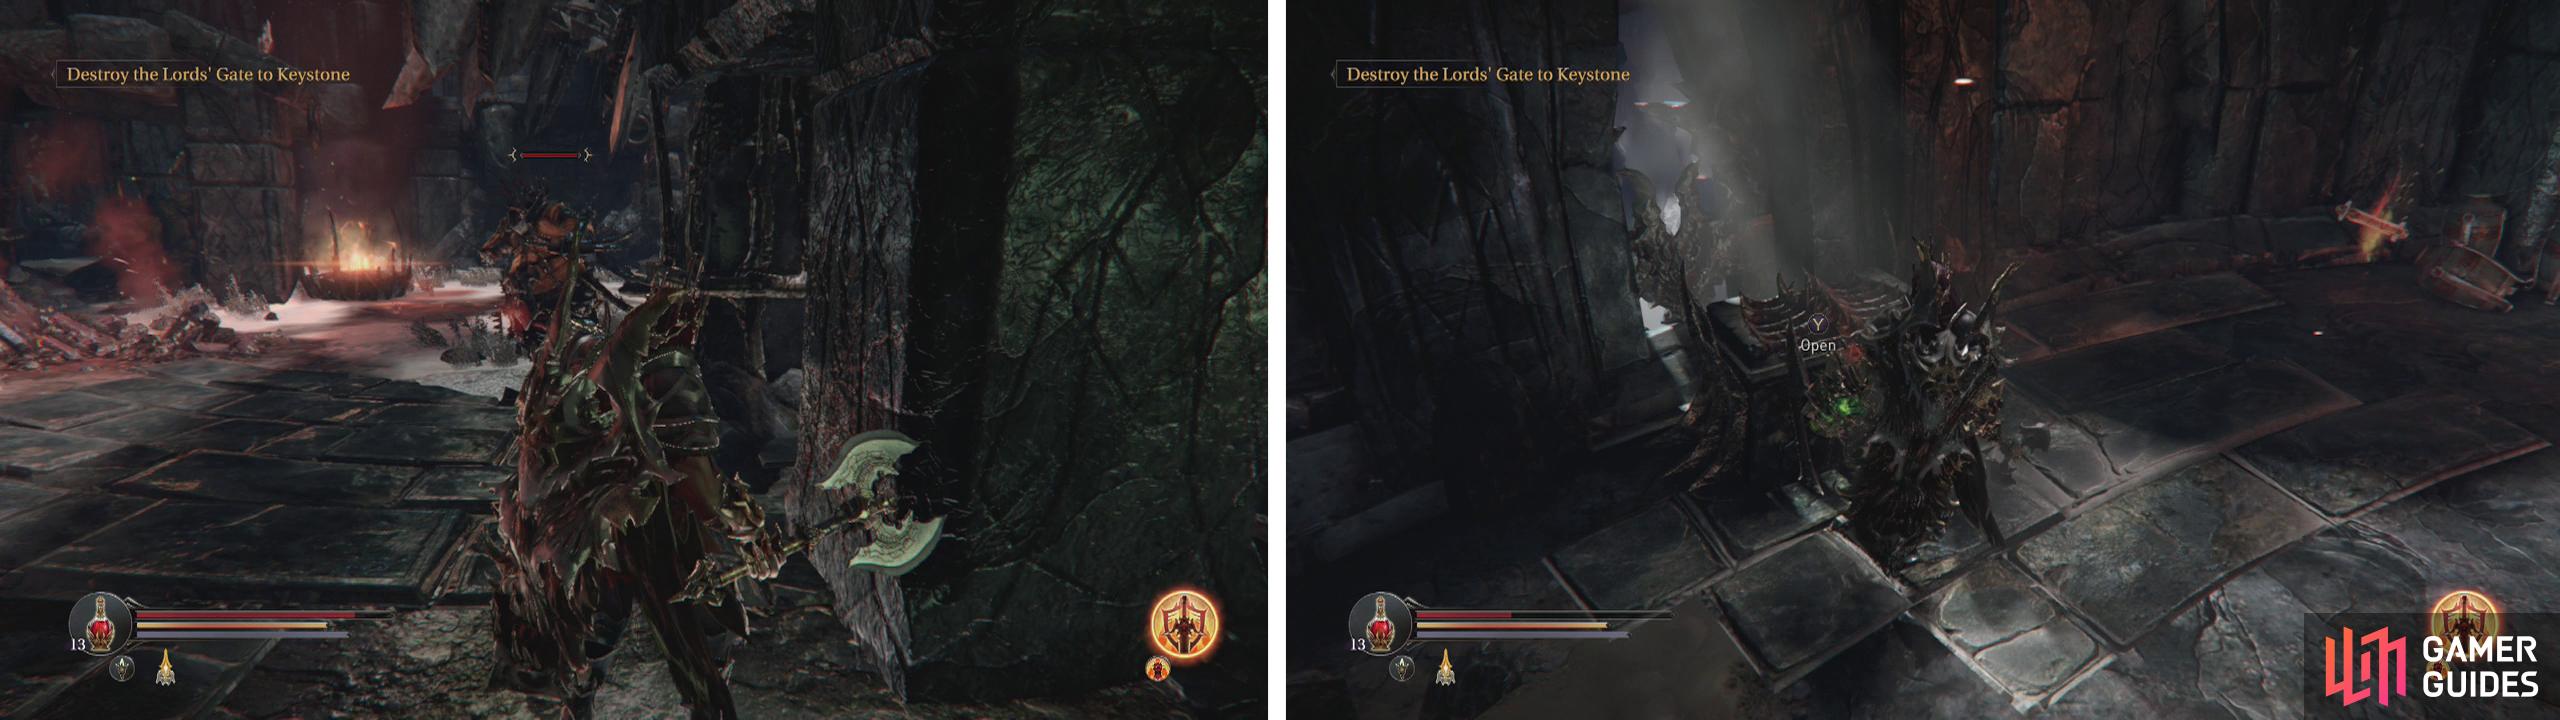 Clear out the Forger (left) and Rogues at ground level. Climb the stairs opposite the entrance for a chest and Audio note (right).